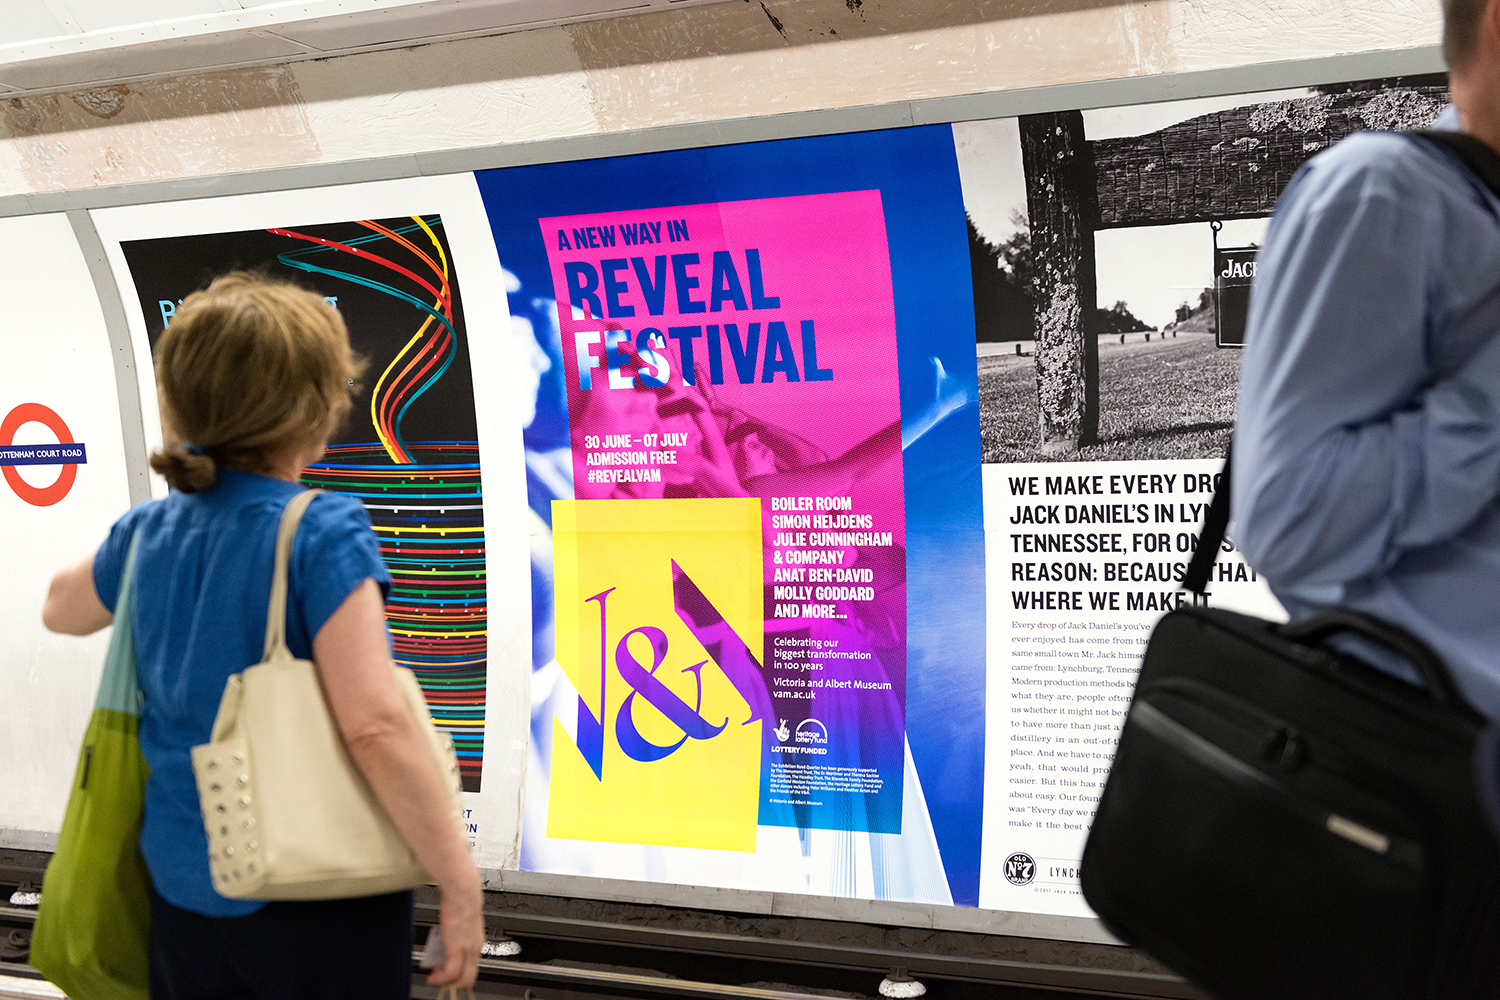 Poster campaign designed by London-based dn&co. for the opening of the V&A's Exhibition Road Quarter